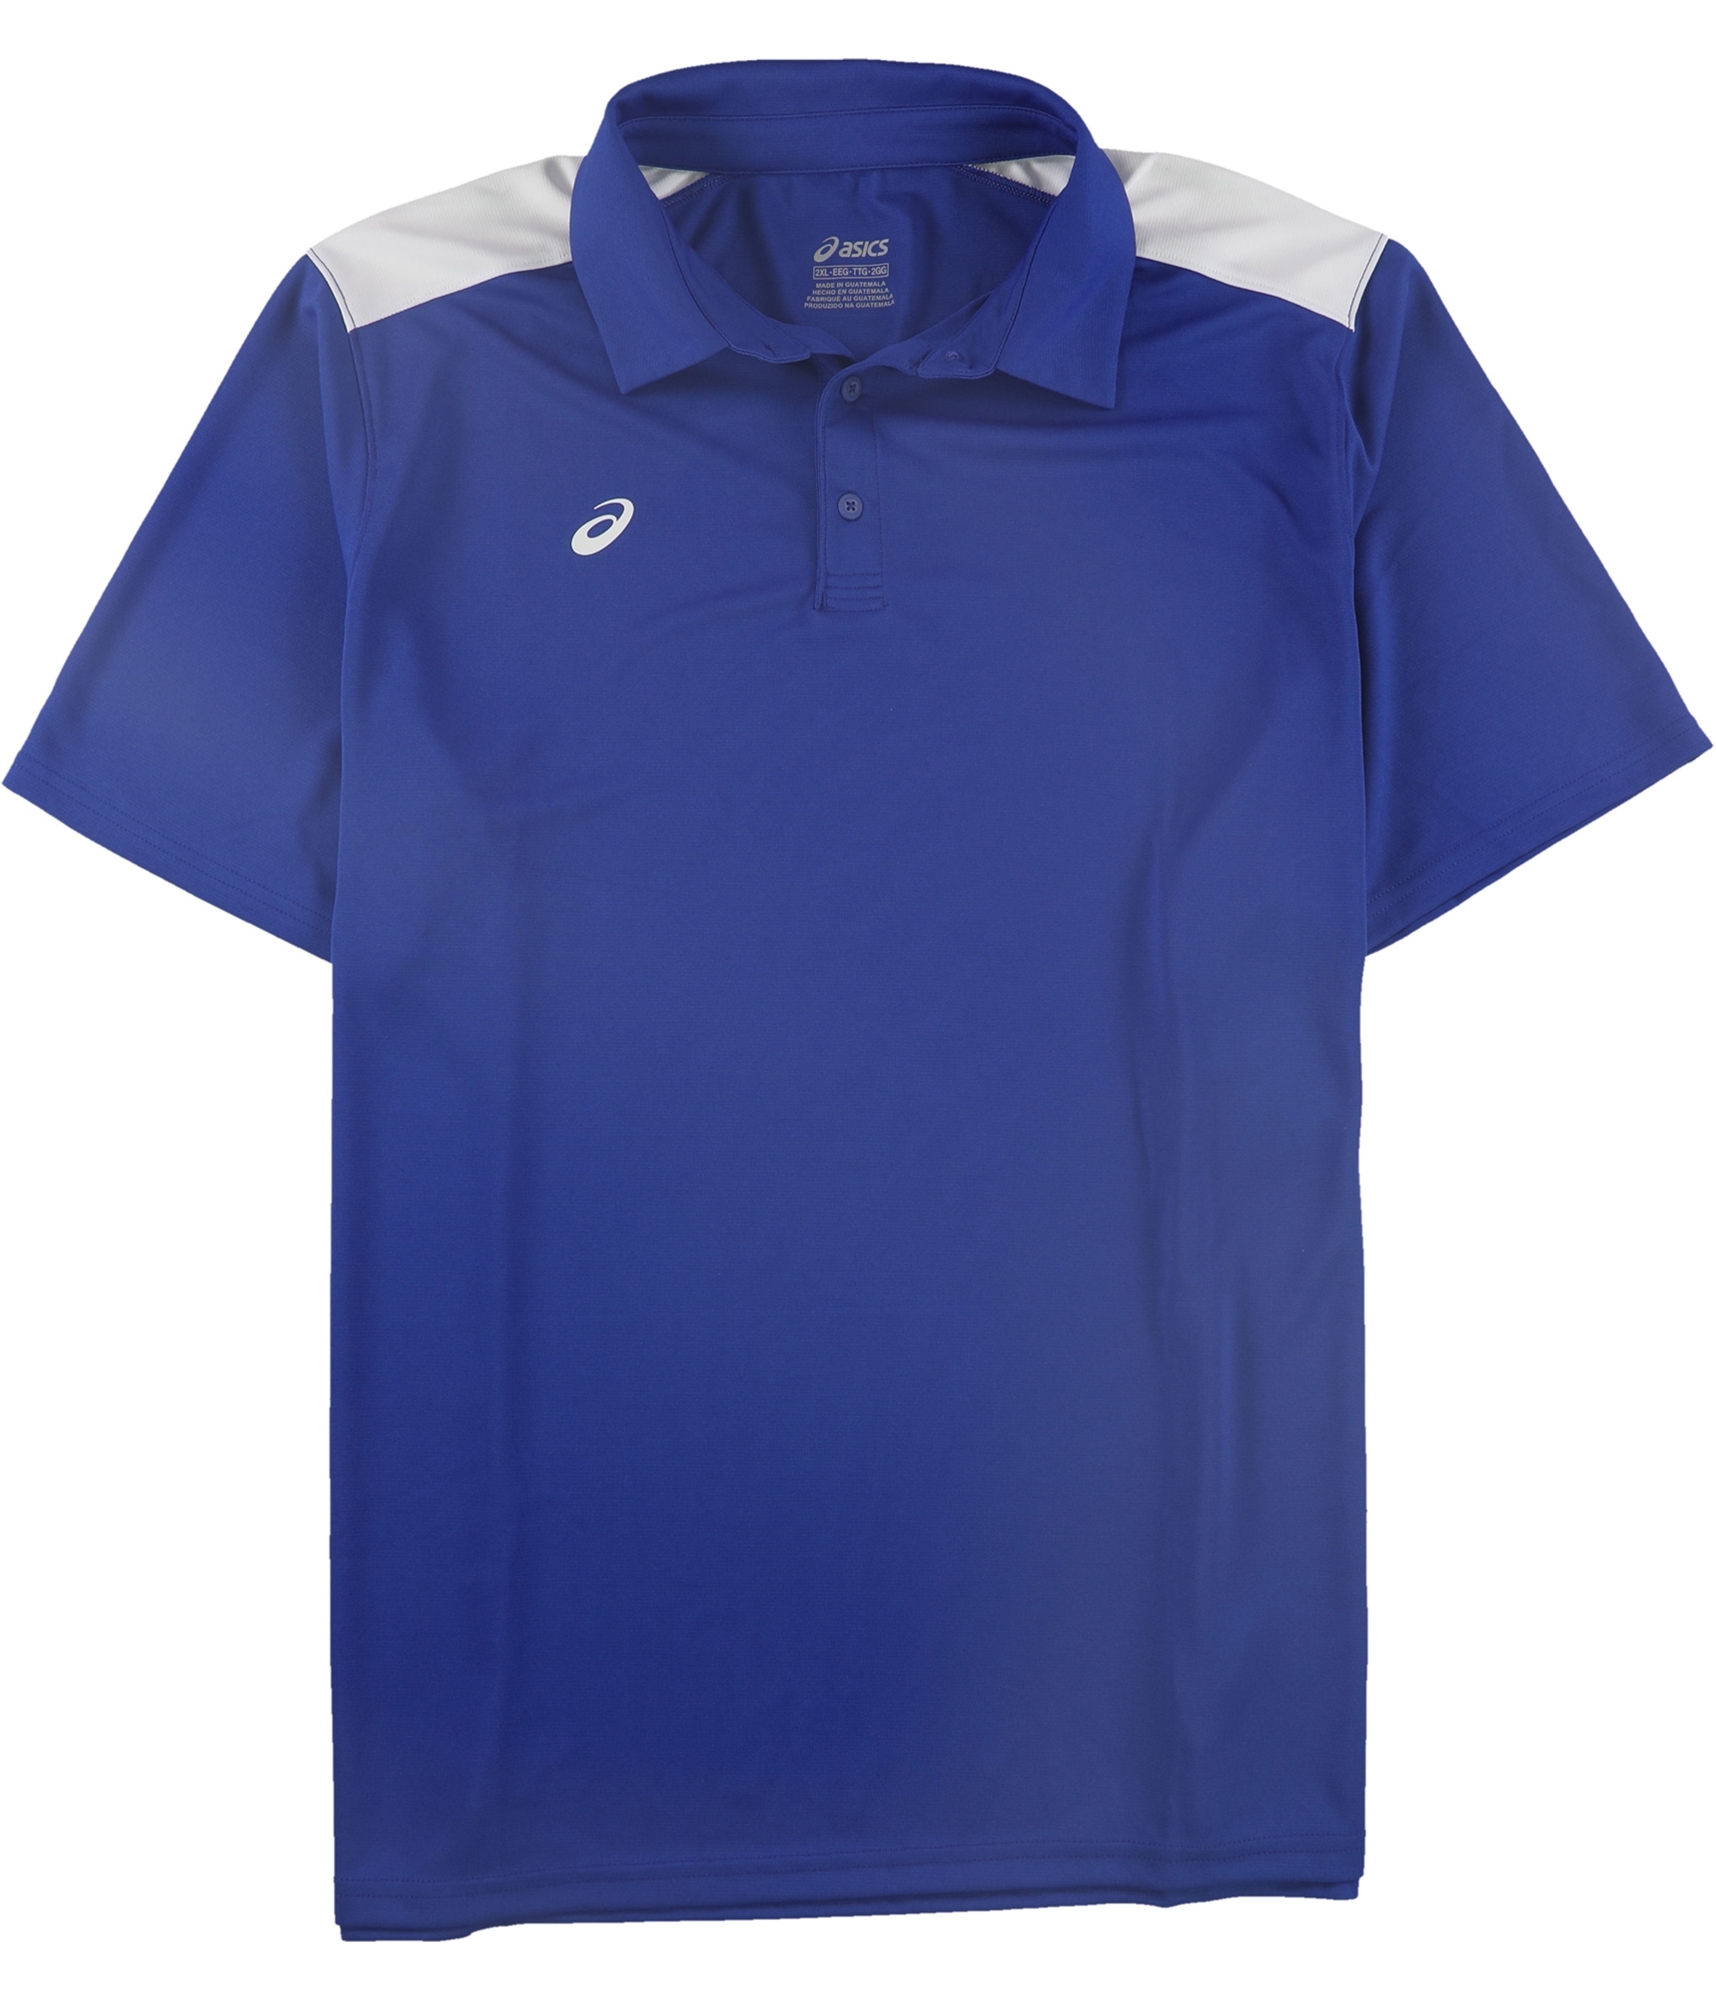 Buy a Asics Mens Core Blocked Rugby Polo Shirt